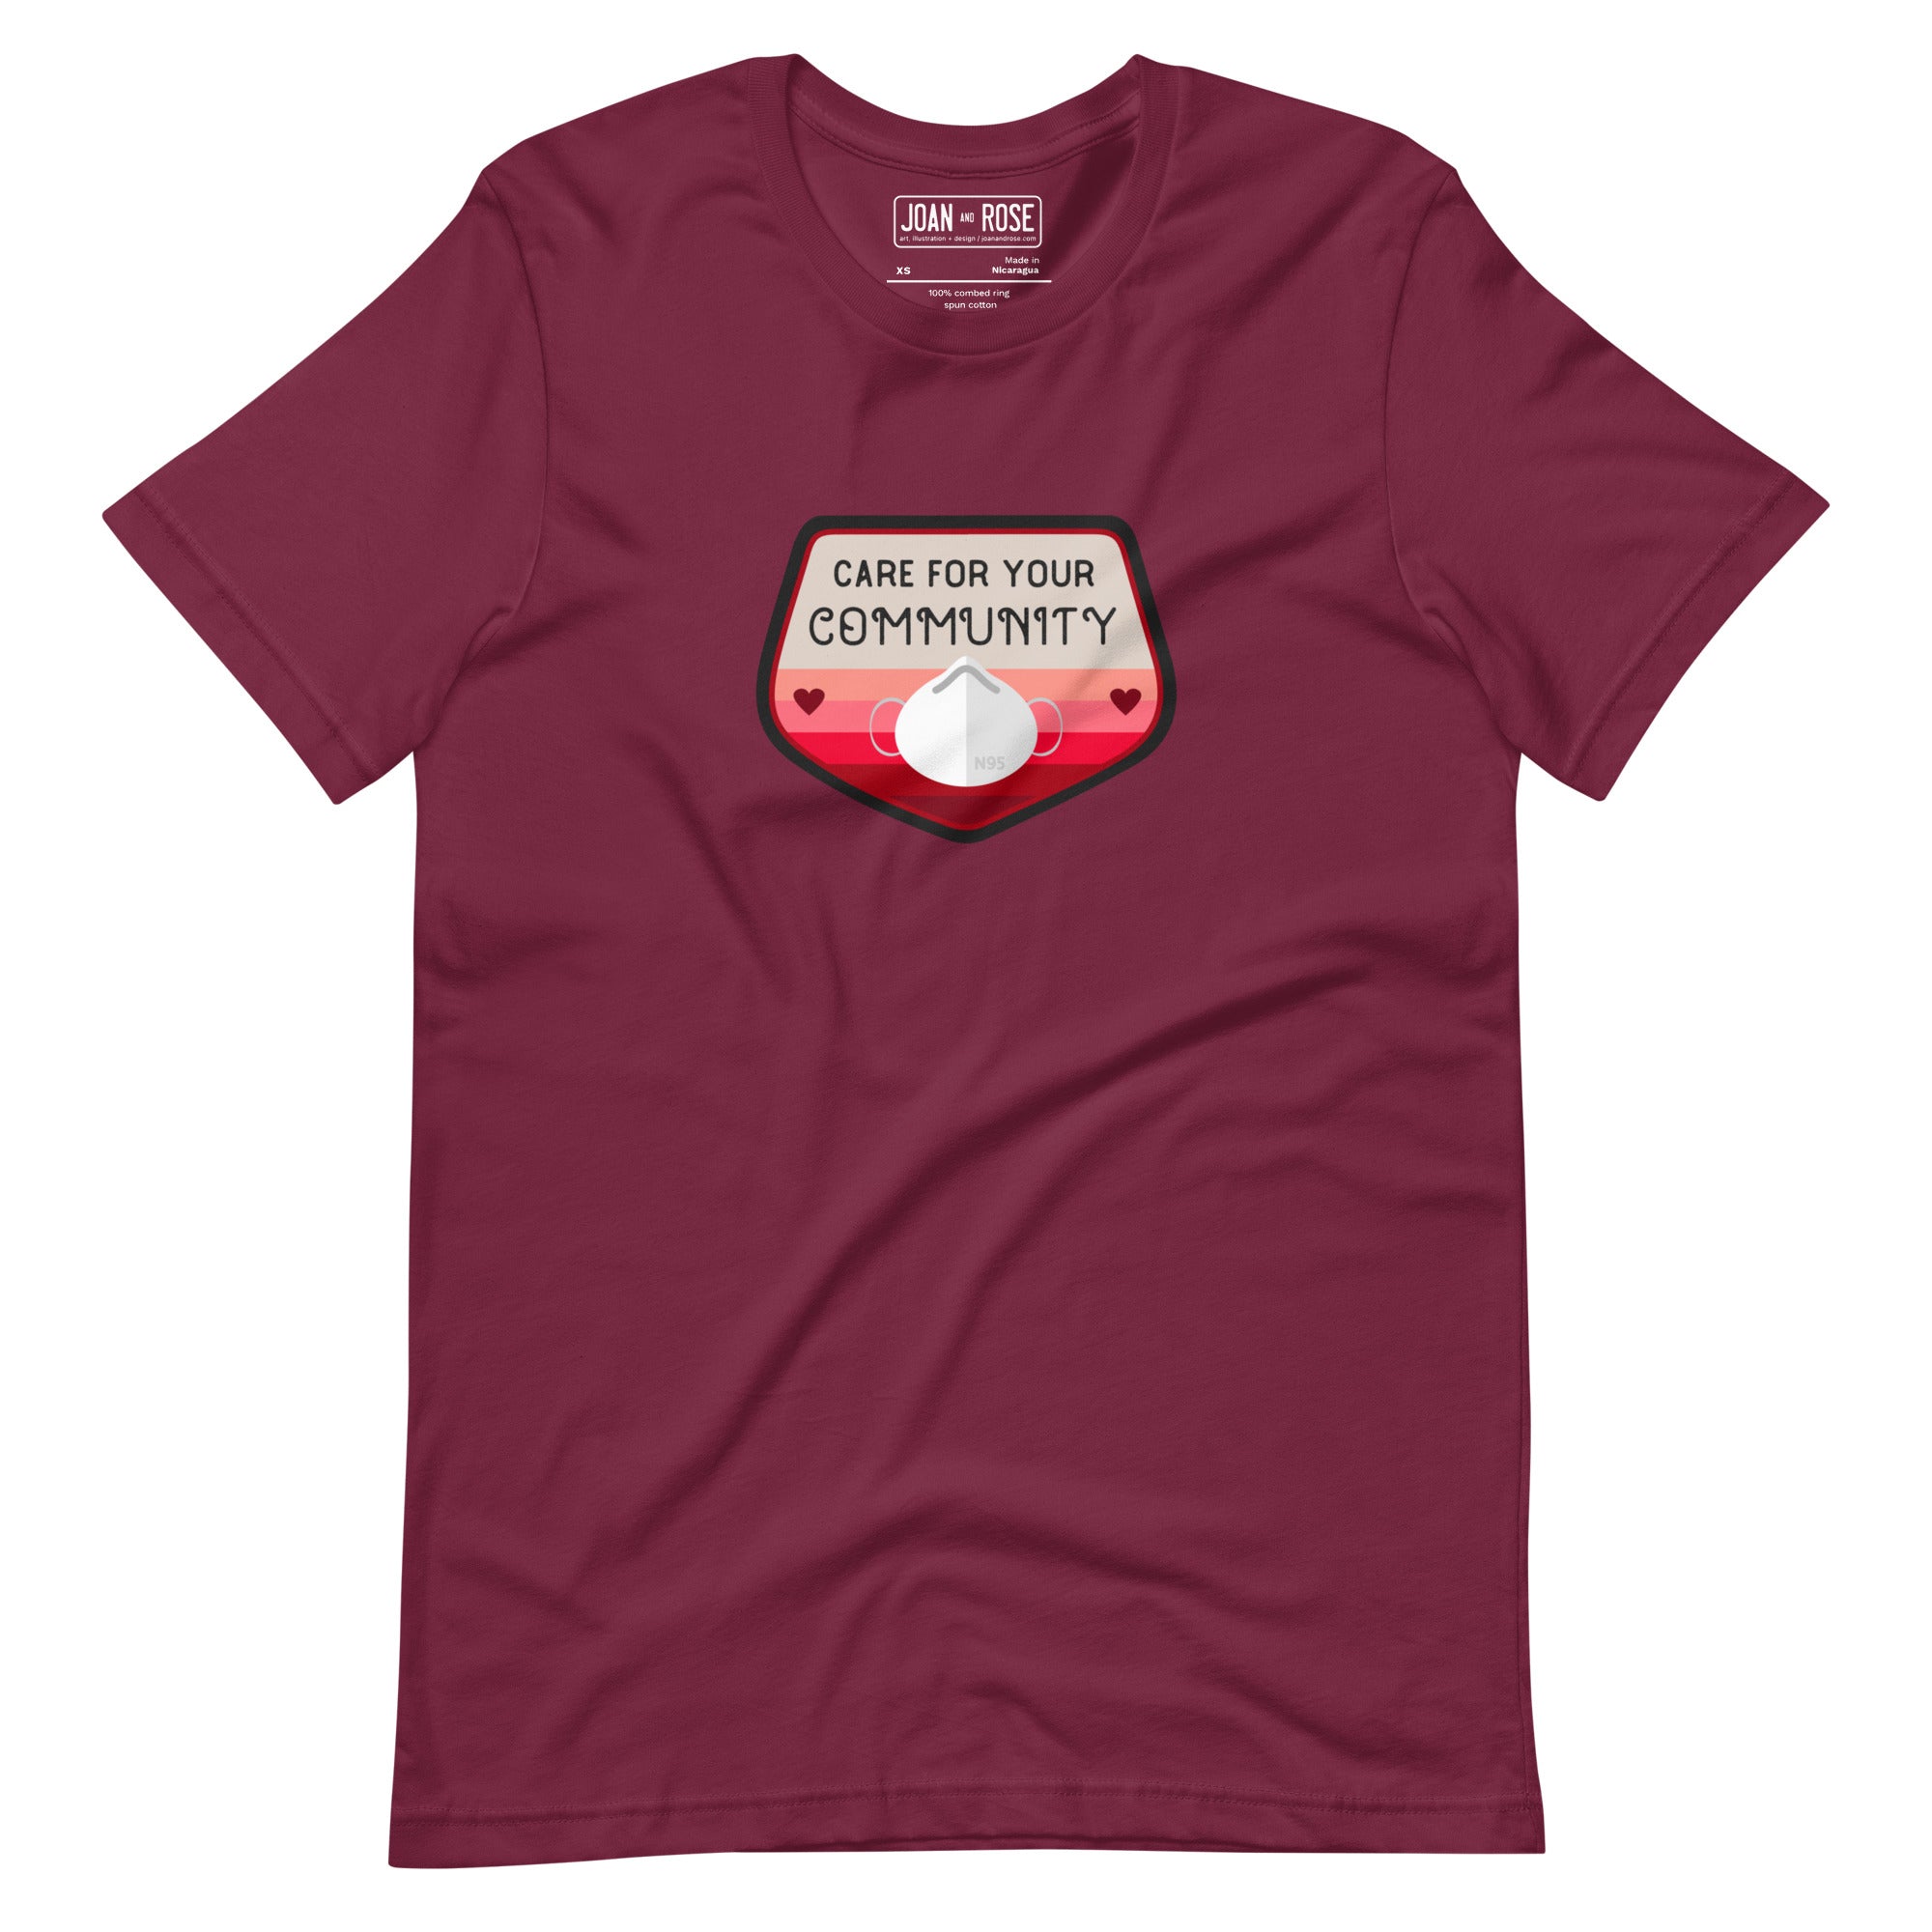 View of Care for your community t-shirt in maroon